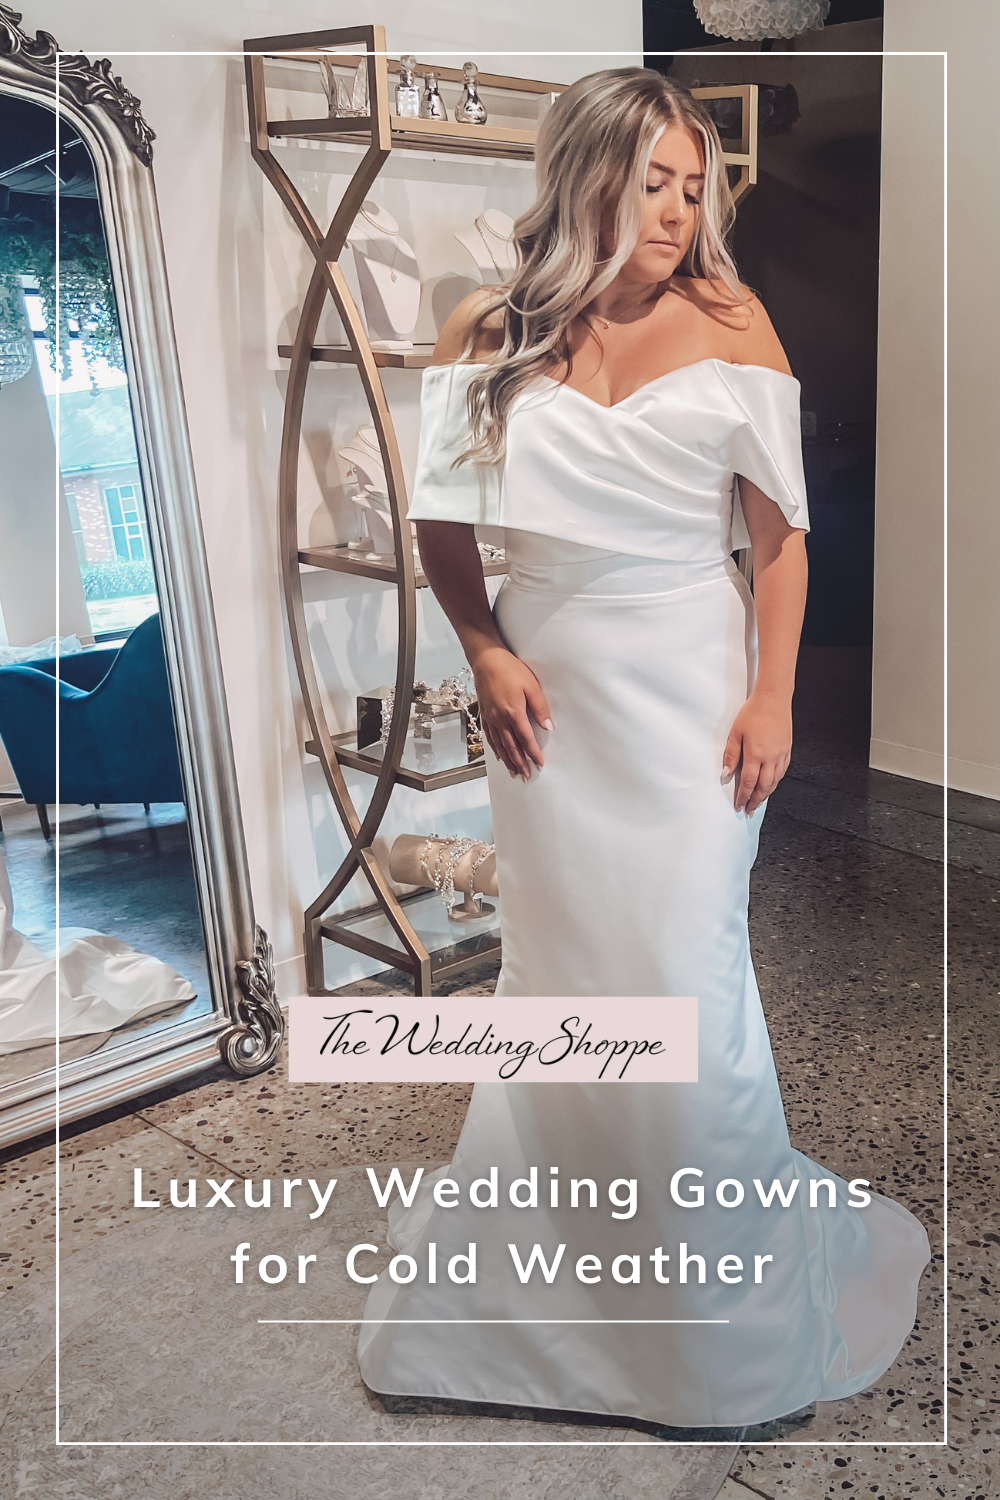 blog post graphic for "Luxury Wedding Gowns for Cold Weather" showing woman in wedding gown for cold weather